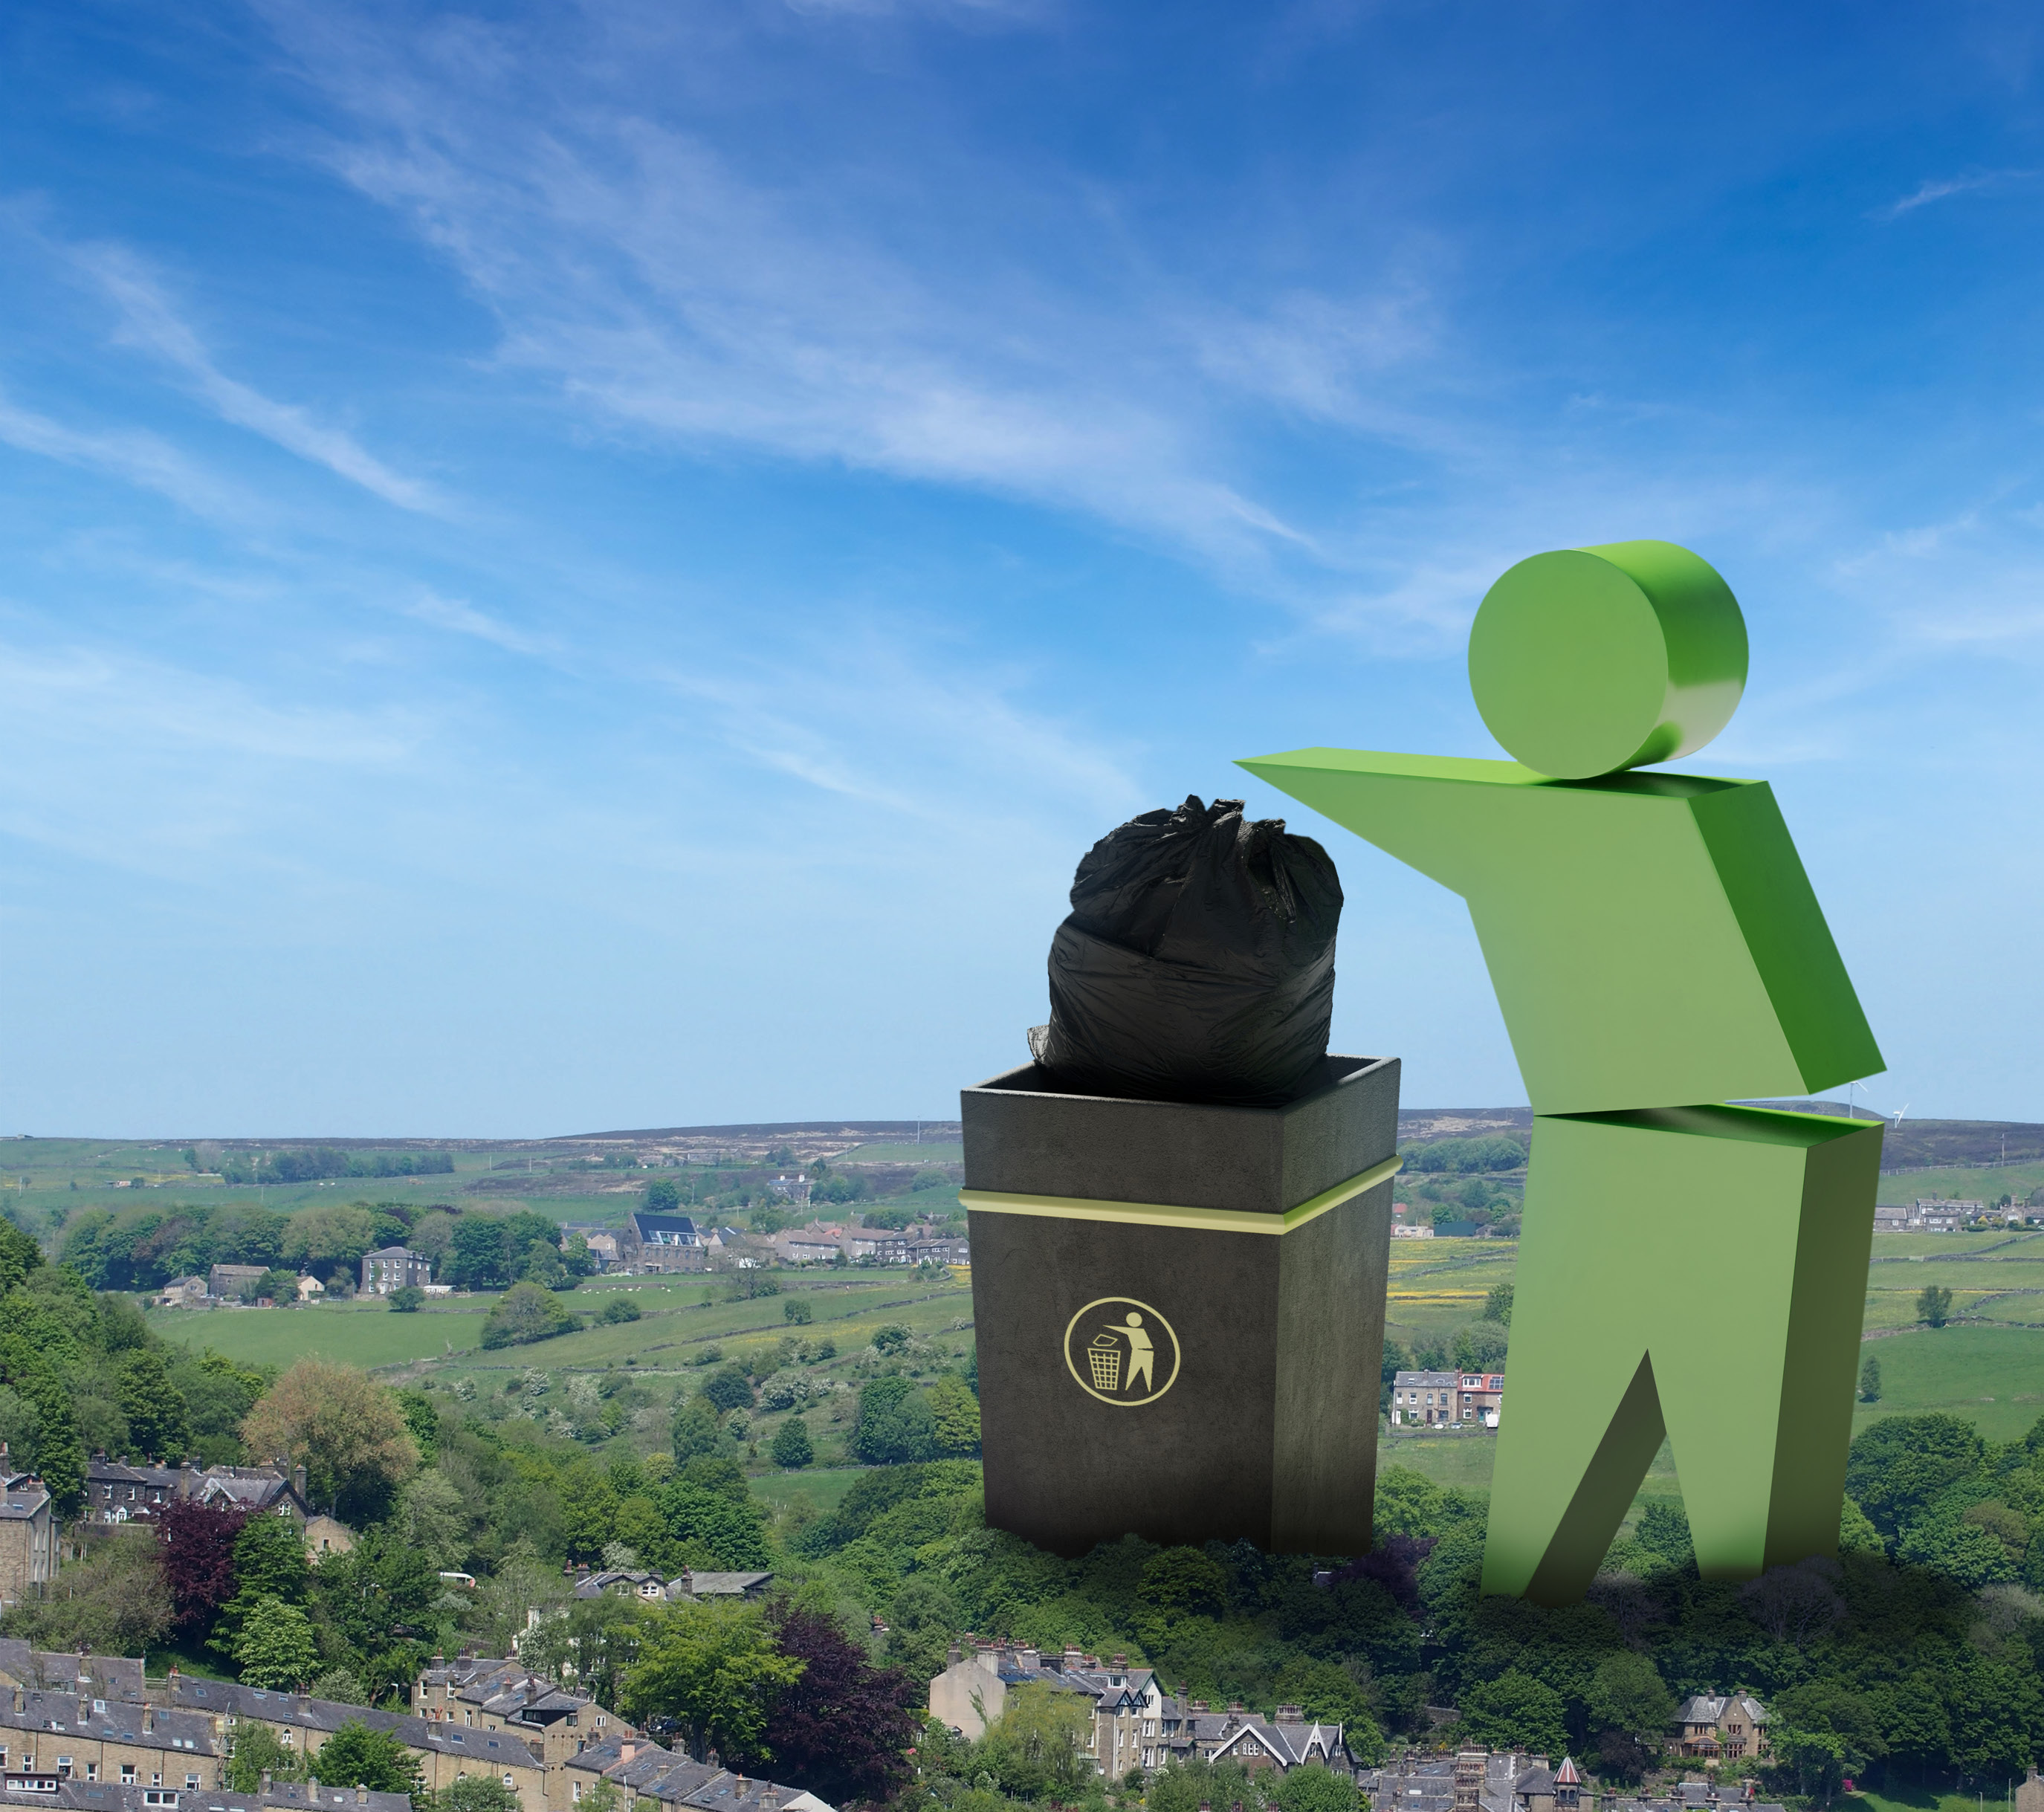 Keep Britain Tidy image showing a large green man putting a bin bag into a large bin with background of houses, open land and blue sky